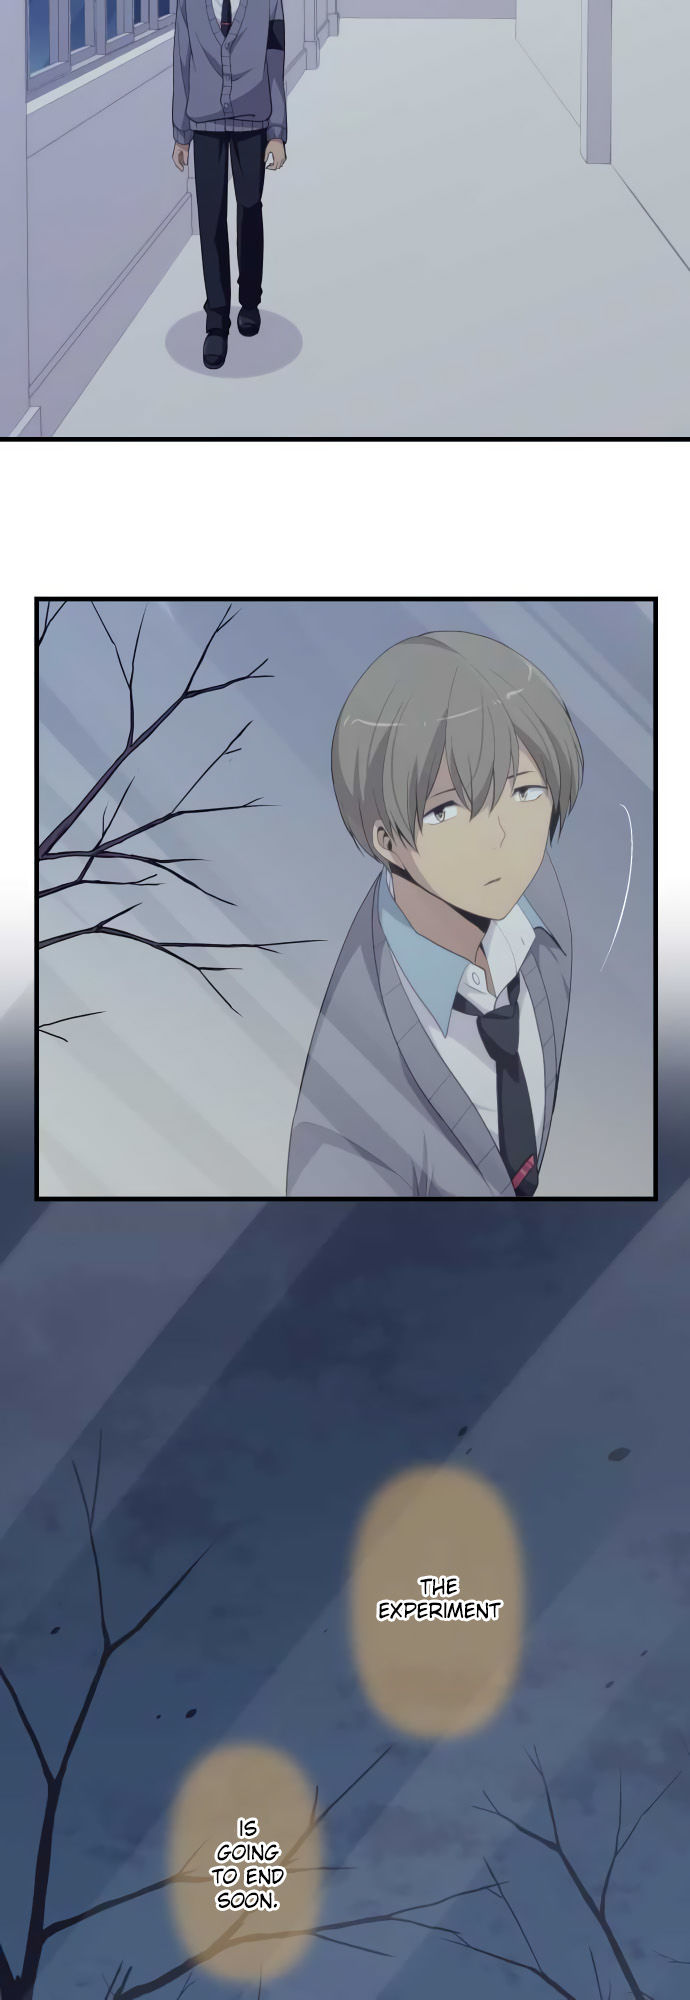 ReLIFE 204